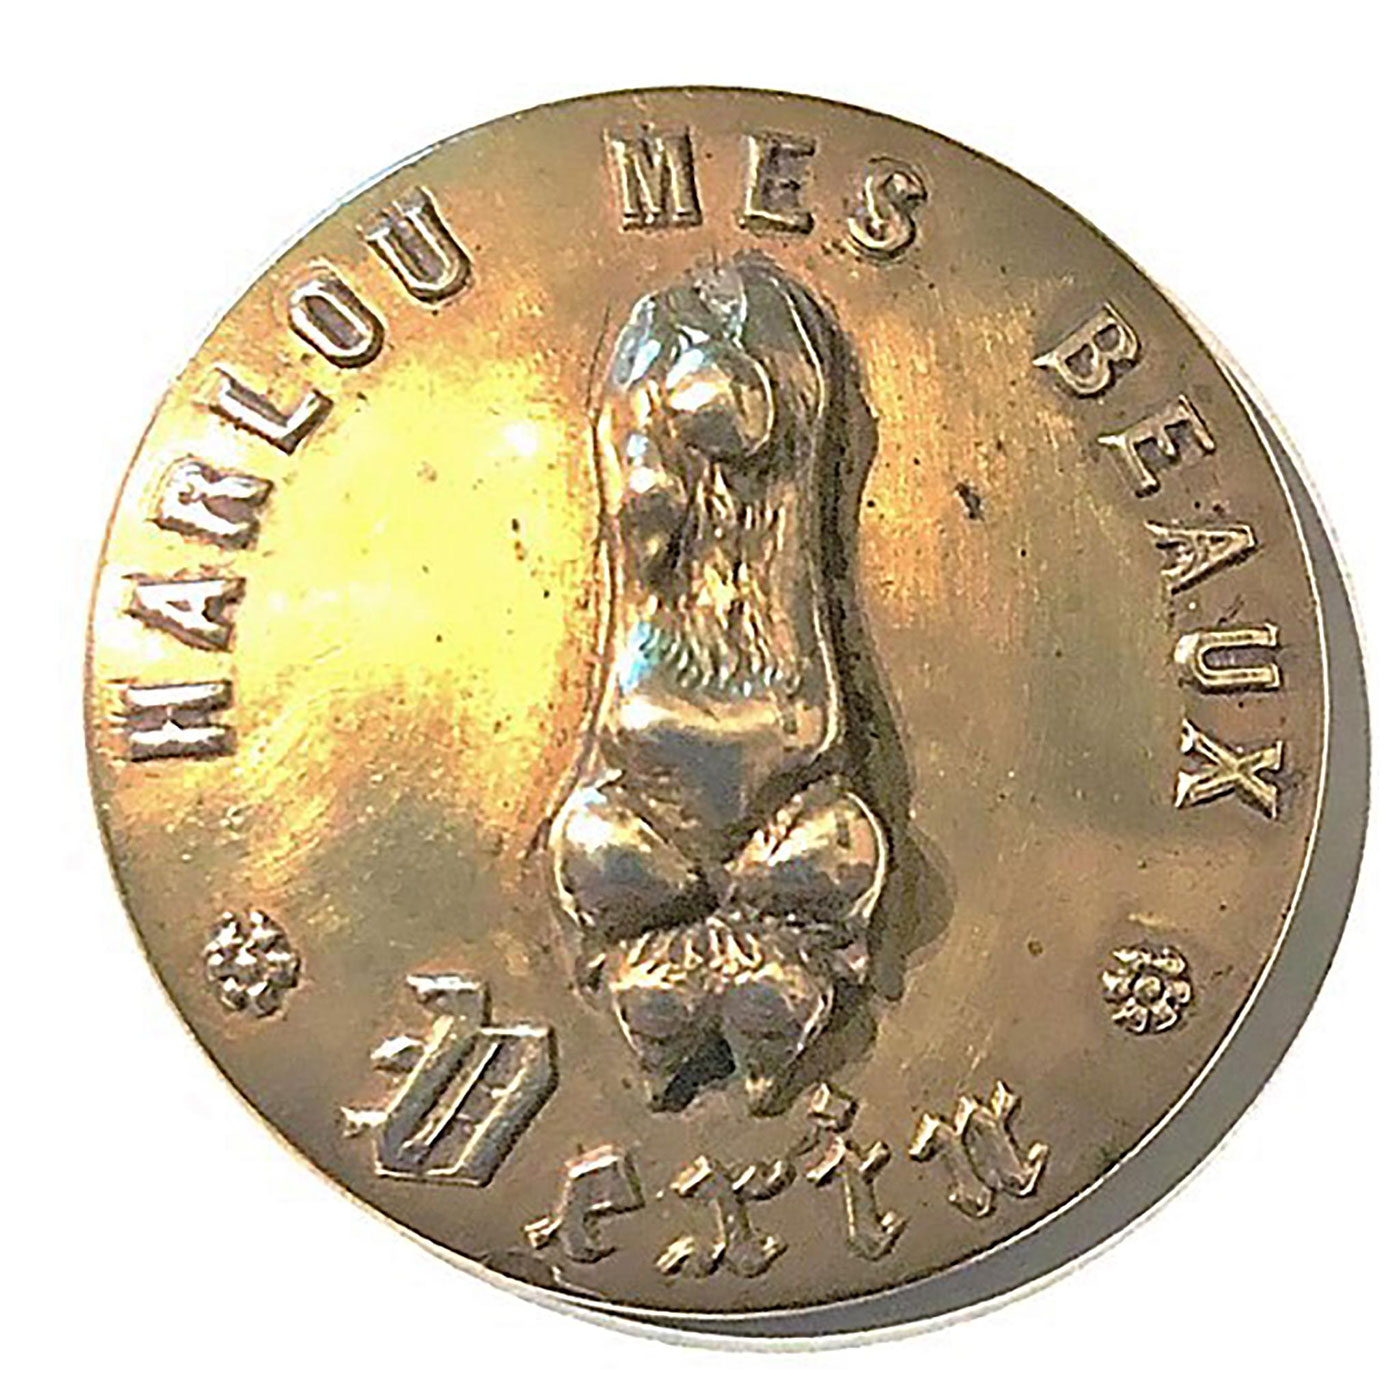 A RARE FRENCH SPORTING/HINT CLUB BUTTON